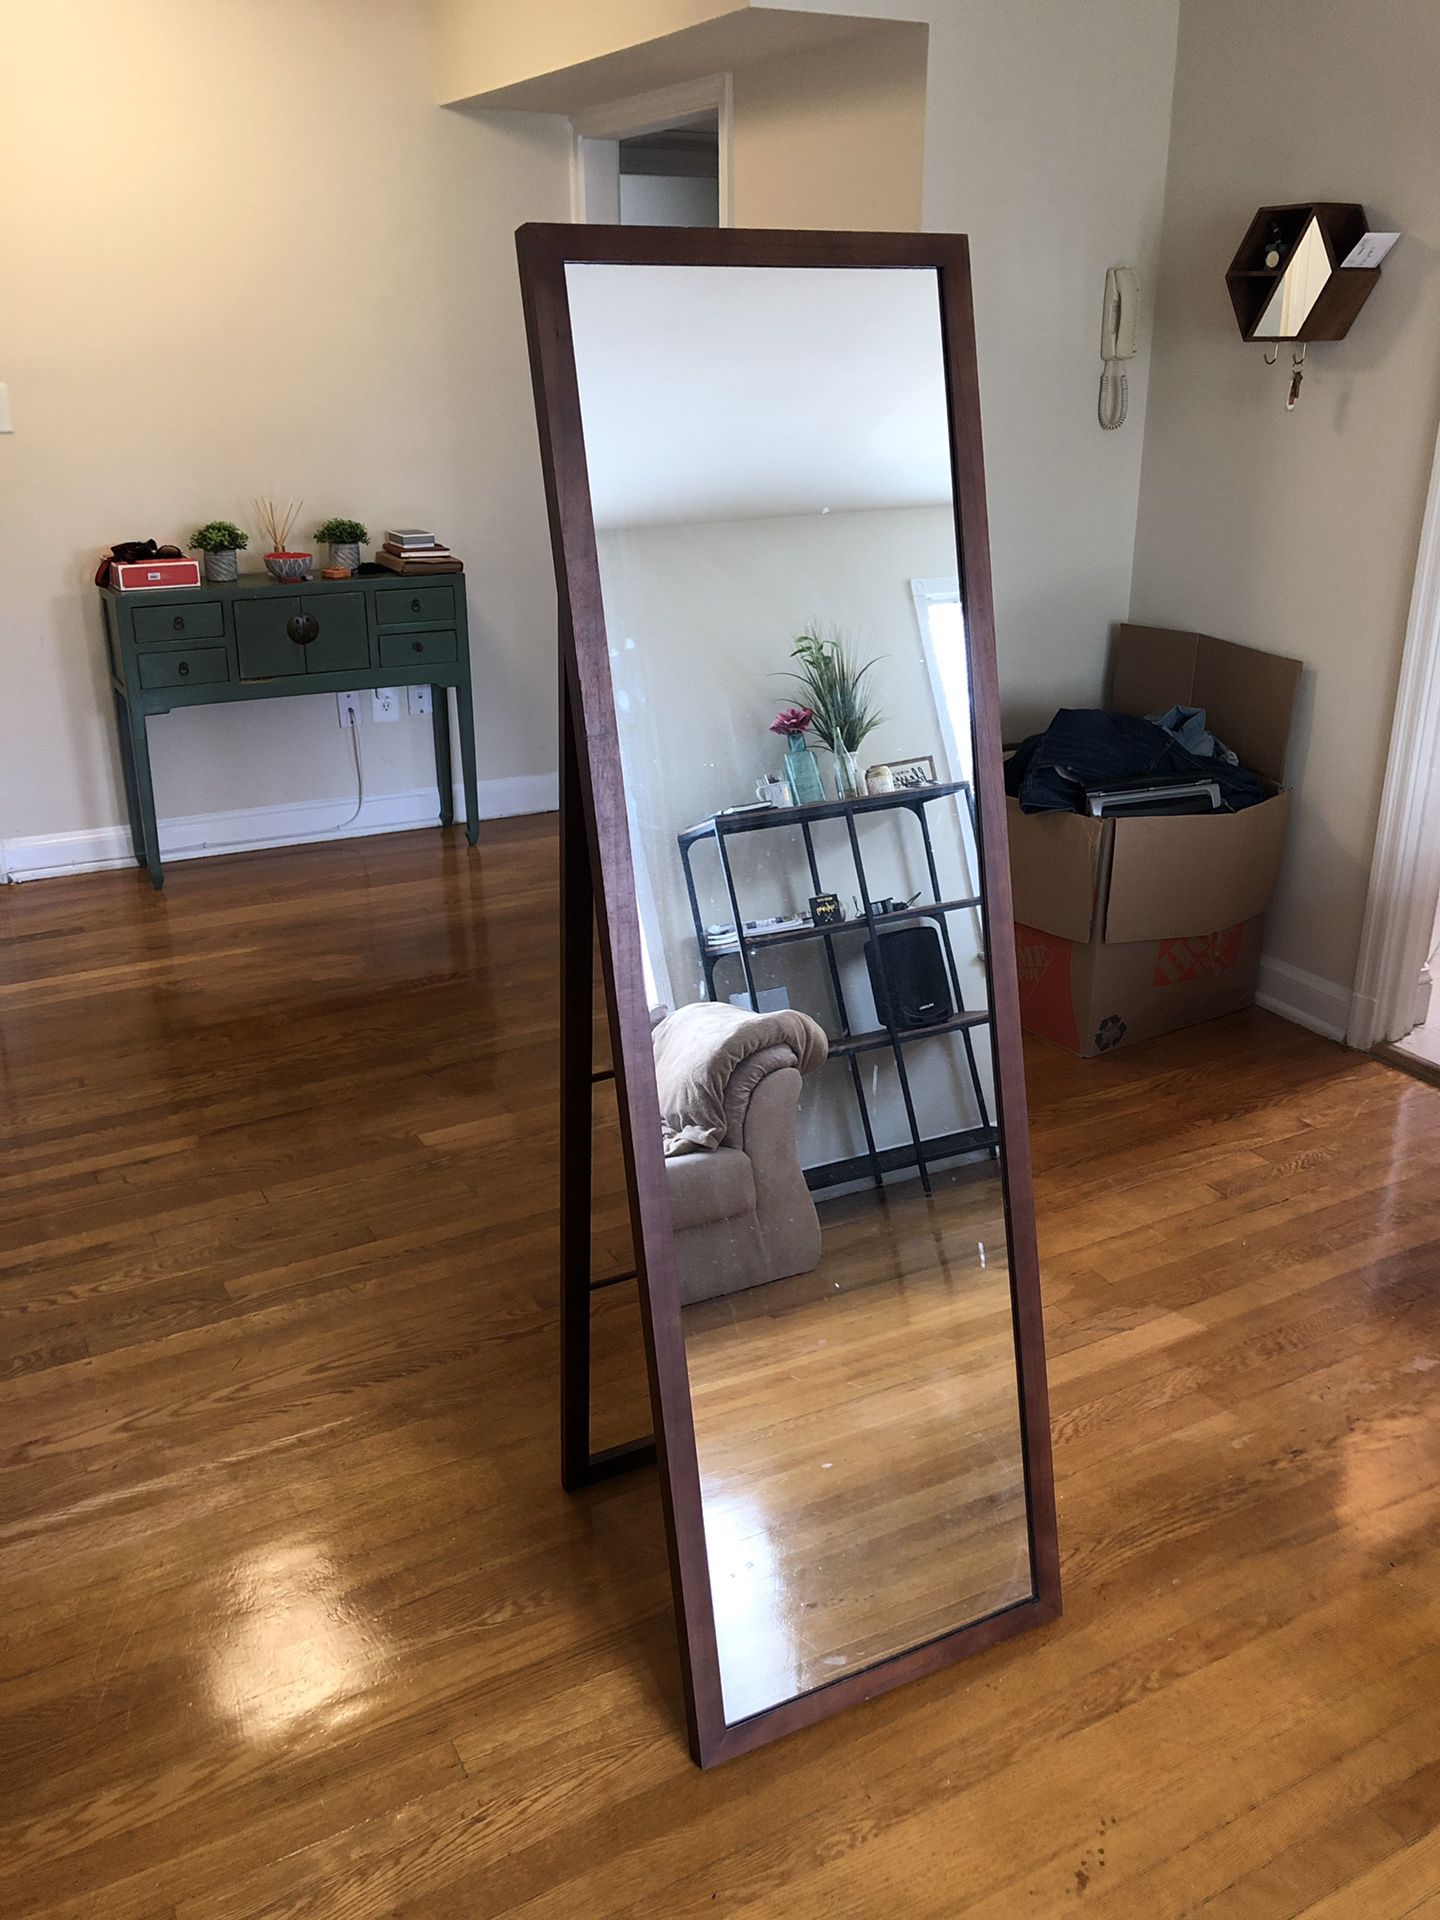 Standing Floor Mirror From Target Available!